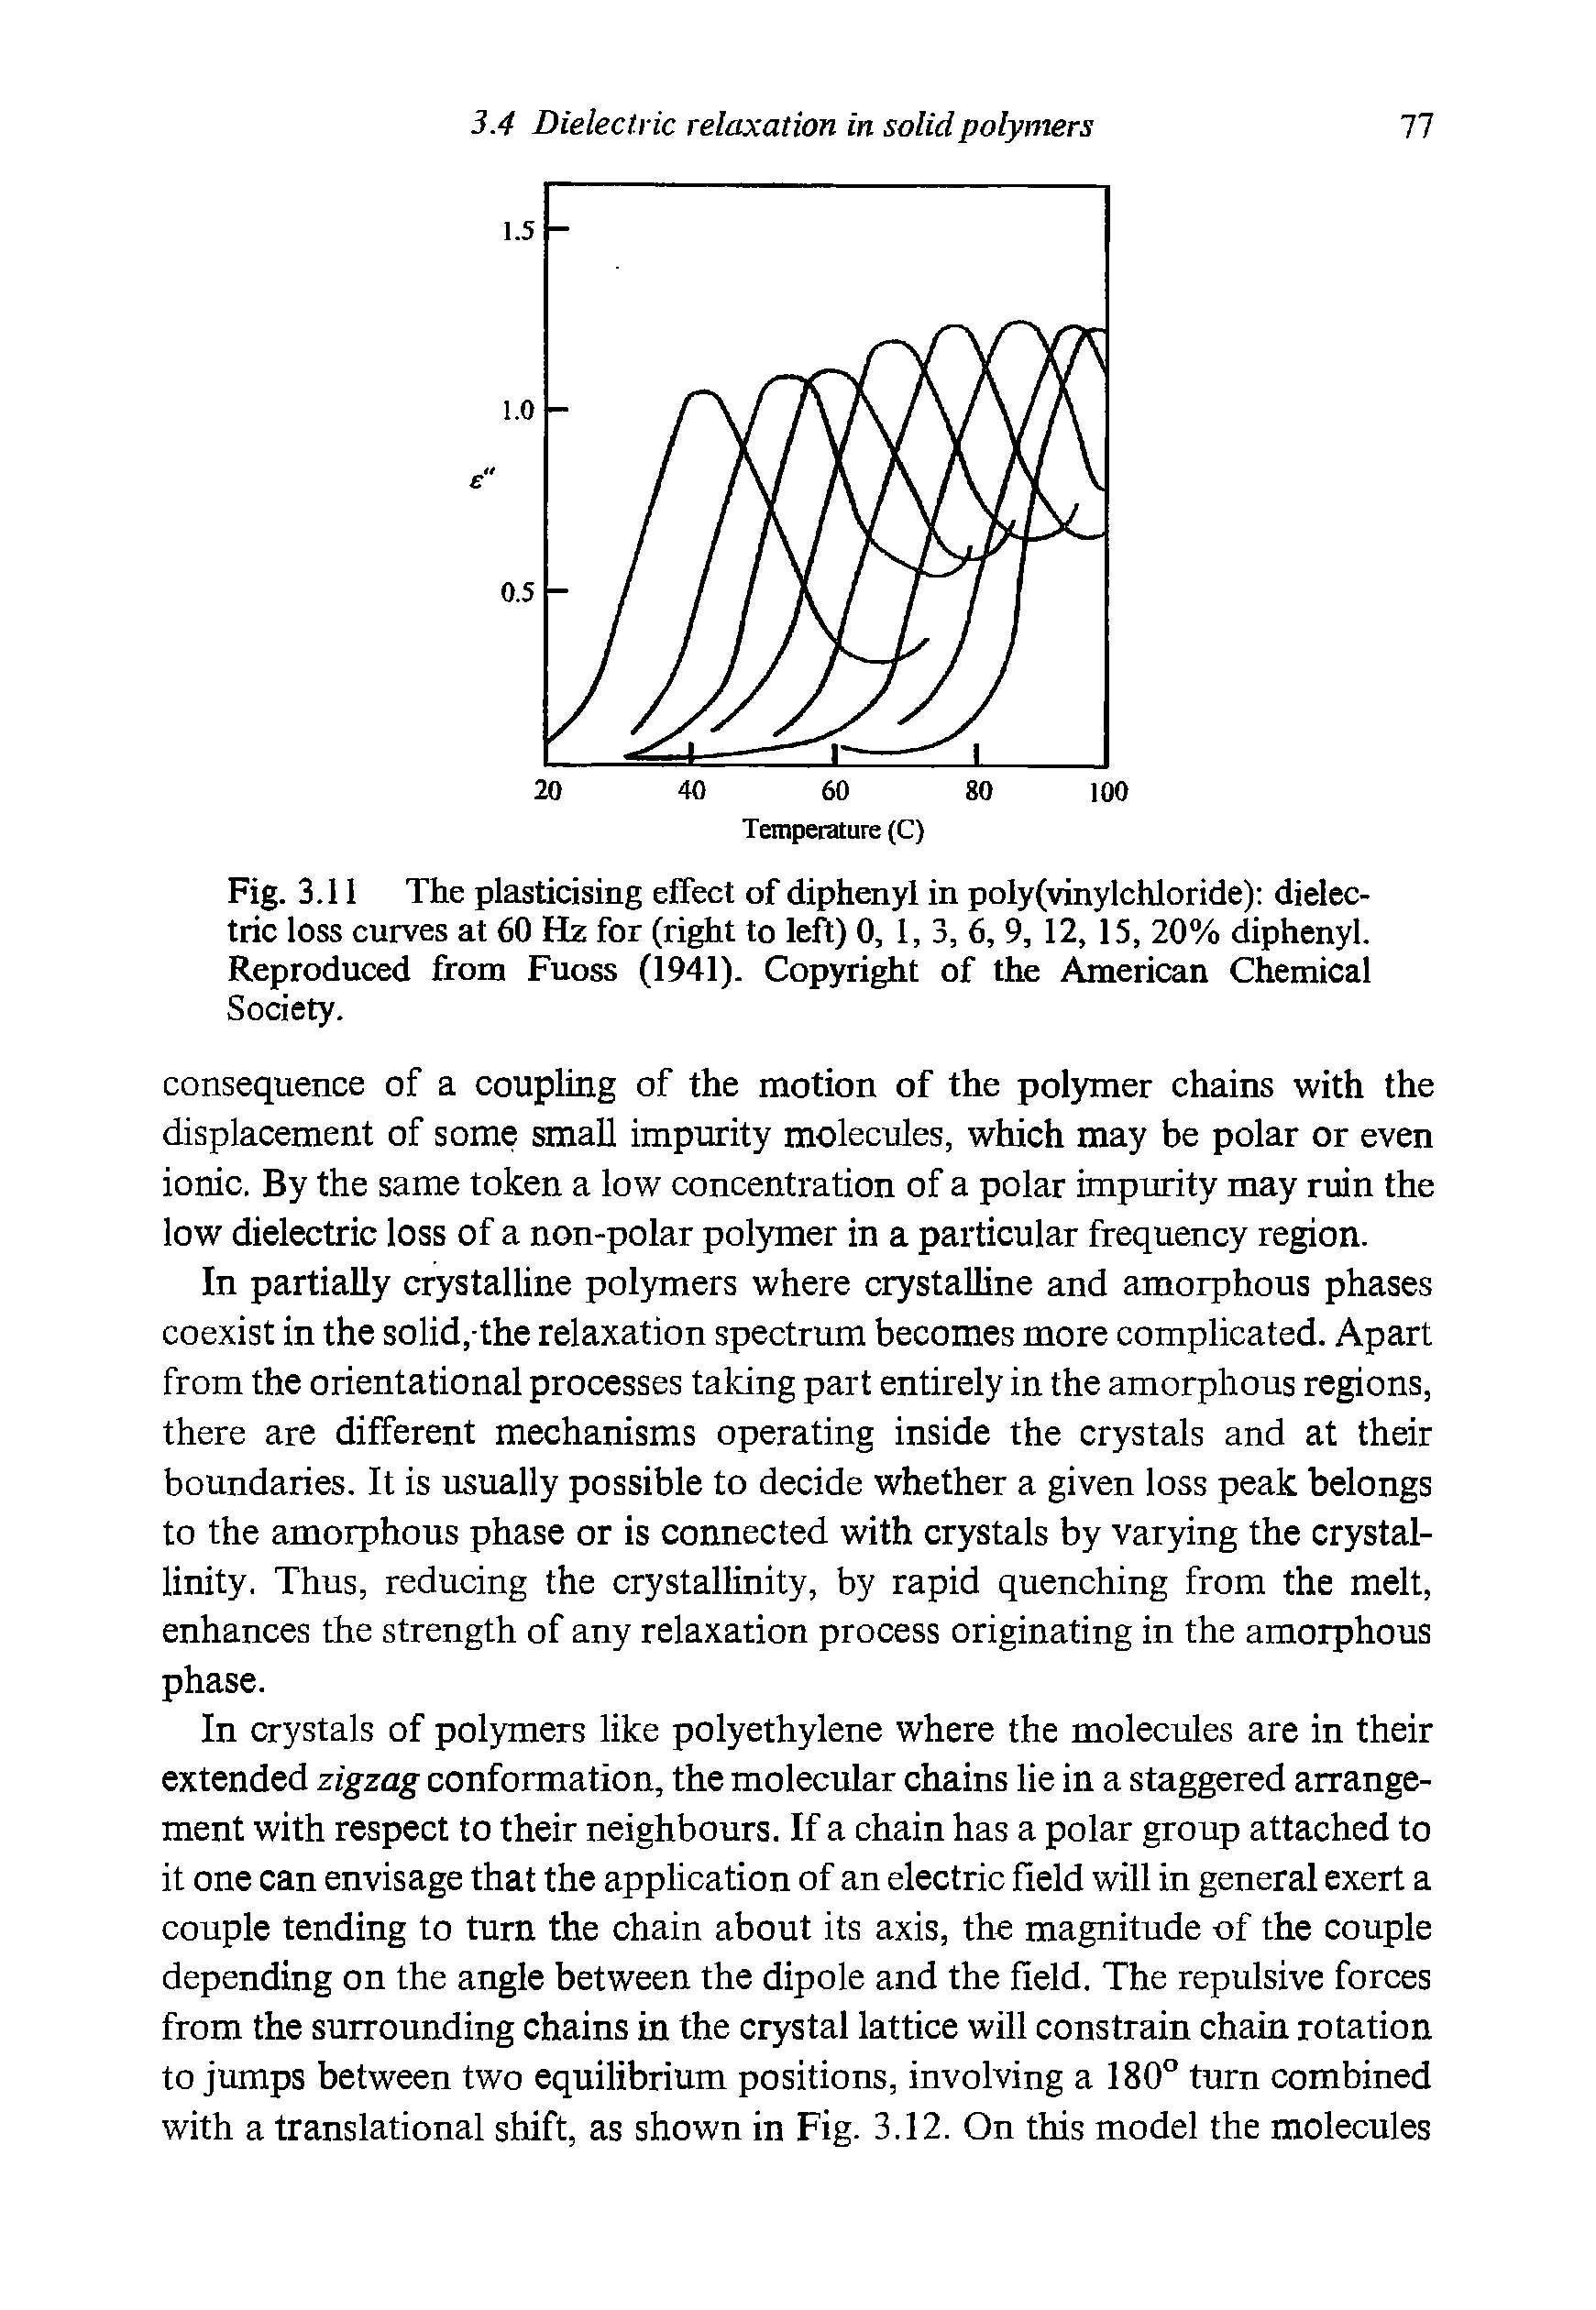 Fig. 3.11 The plasticising effect of diphenyl in poly(vinylchloride) dielectric loss curves at 60 Hz for (right to left) 0, 1, 3, 6, 9, 12, 15, 20% diphenyl. Reproduced from Fuoss (1941). Copyright of the American Chemical Society.